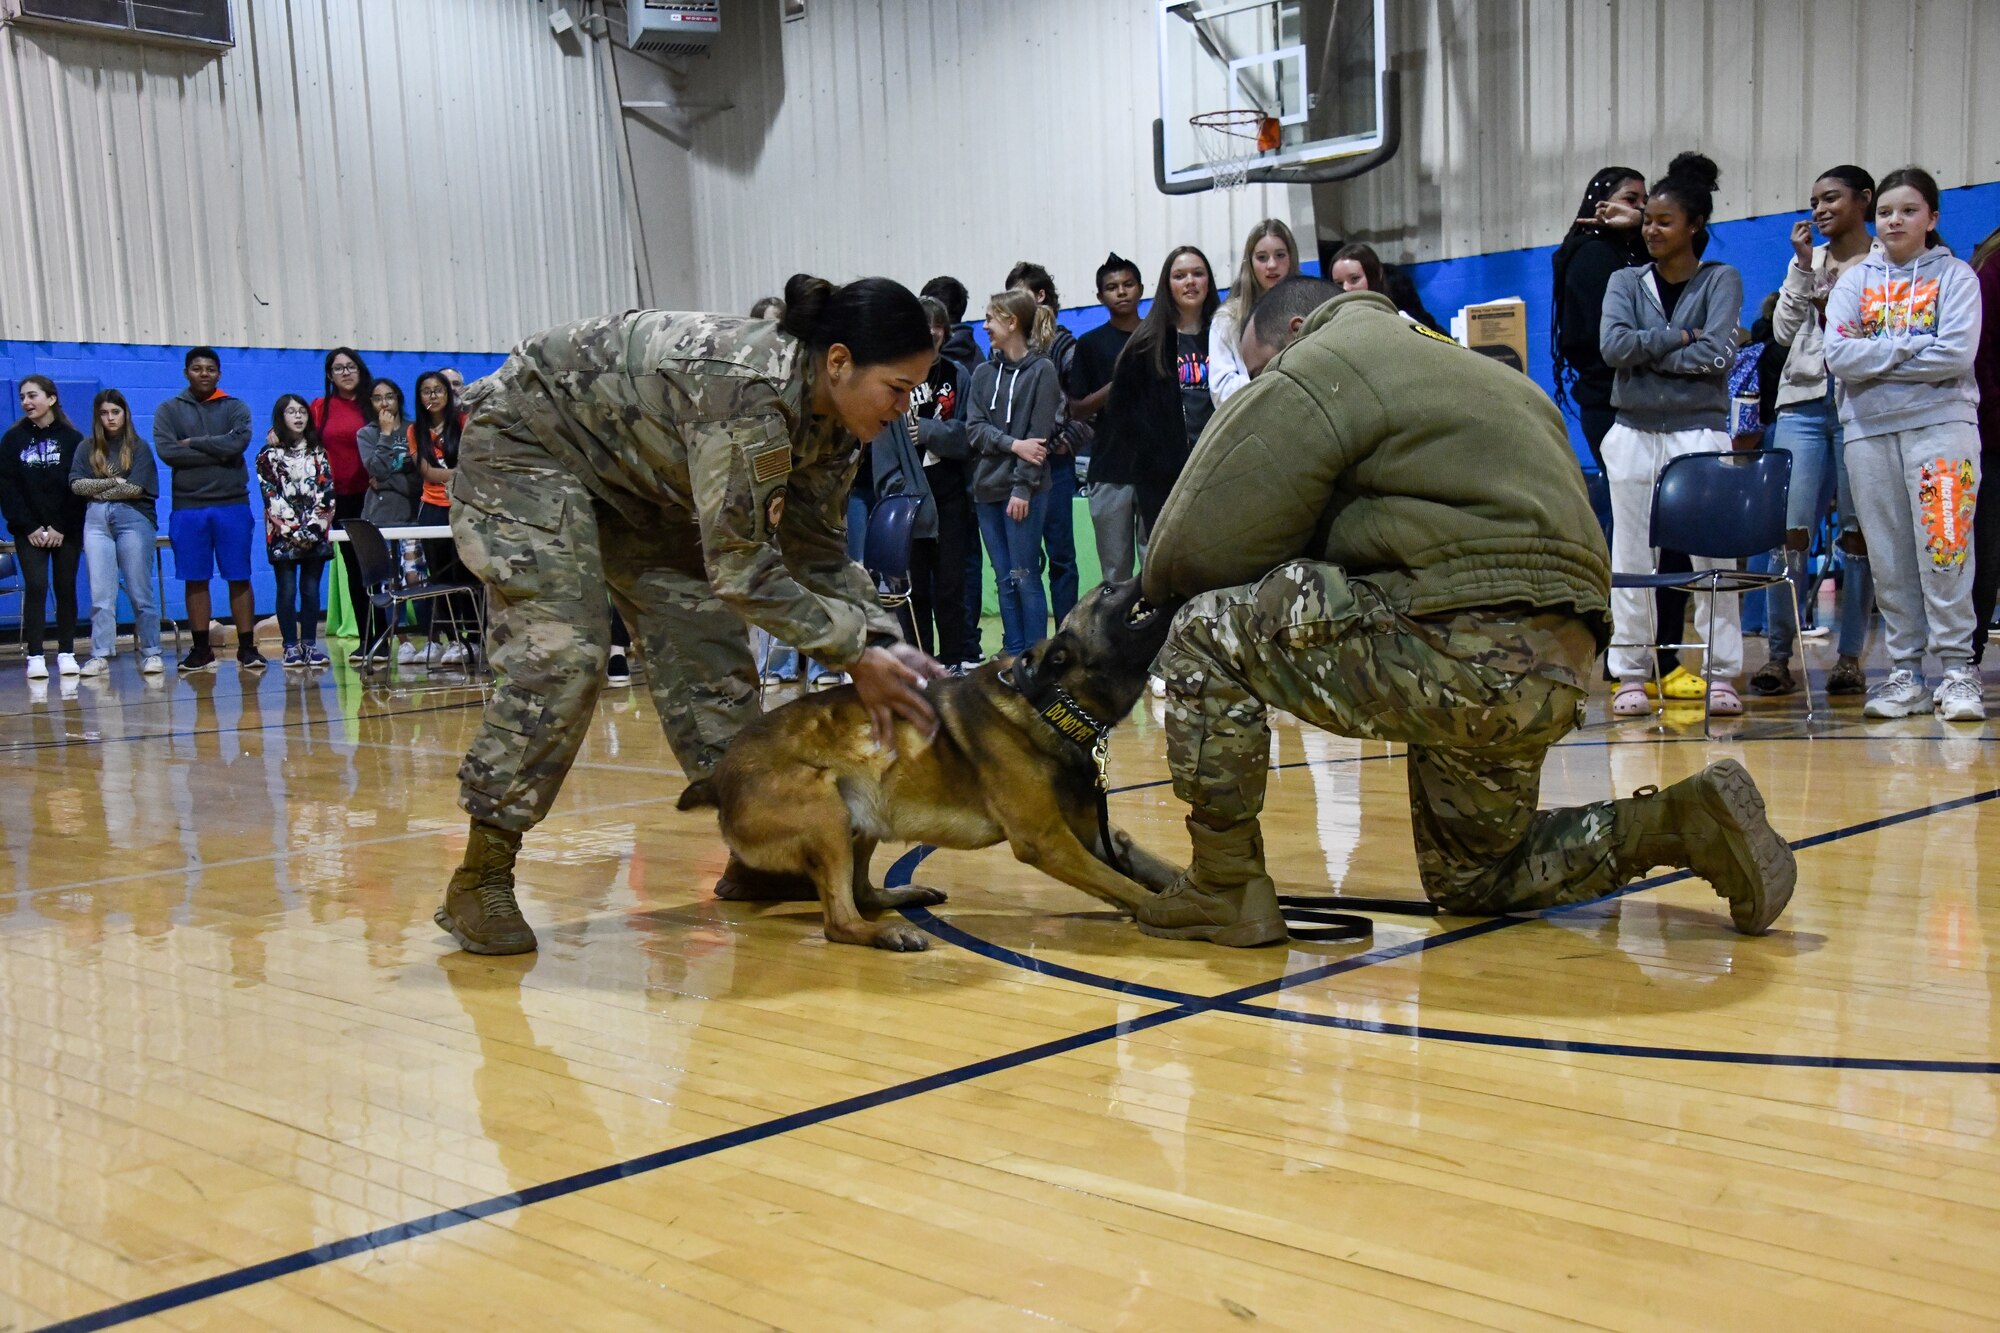 From left, Staff Sgt. Destiny Savini and Tech. Sgt. Andres Posada, 97th Security Forces Squadron (SFS) military working dog handlers, demonstrate threat neutralization at Altus High School, Altus, Oklahoma, March 30, 2022. Military working dogs are trained for many purposes such as tracking, attacking, search and rescue missions and detecting explosives. (U.S. Air Force photo by Airman 1st Class Miyah Gray)